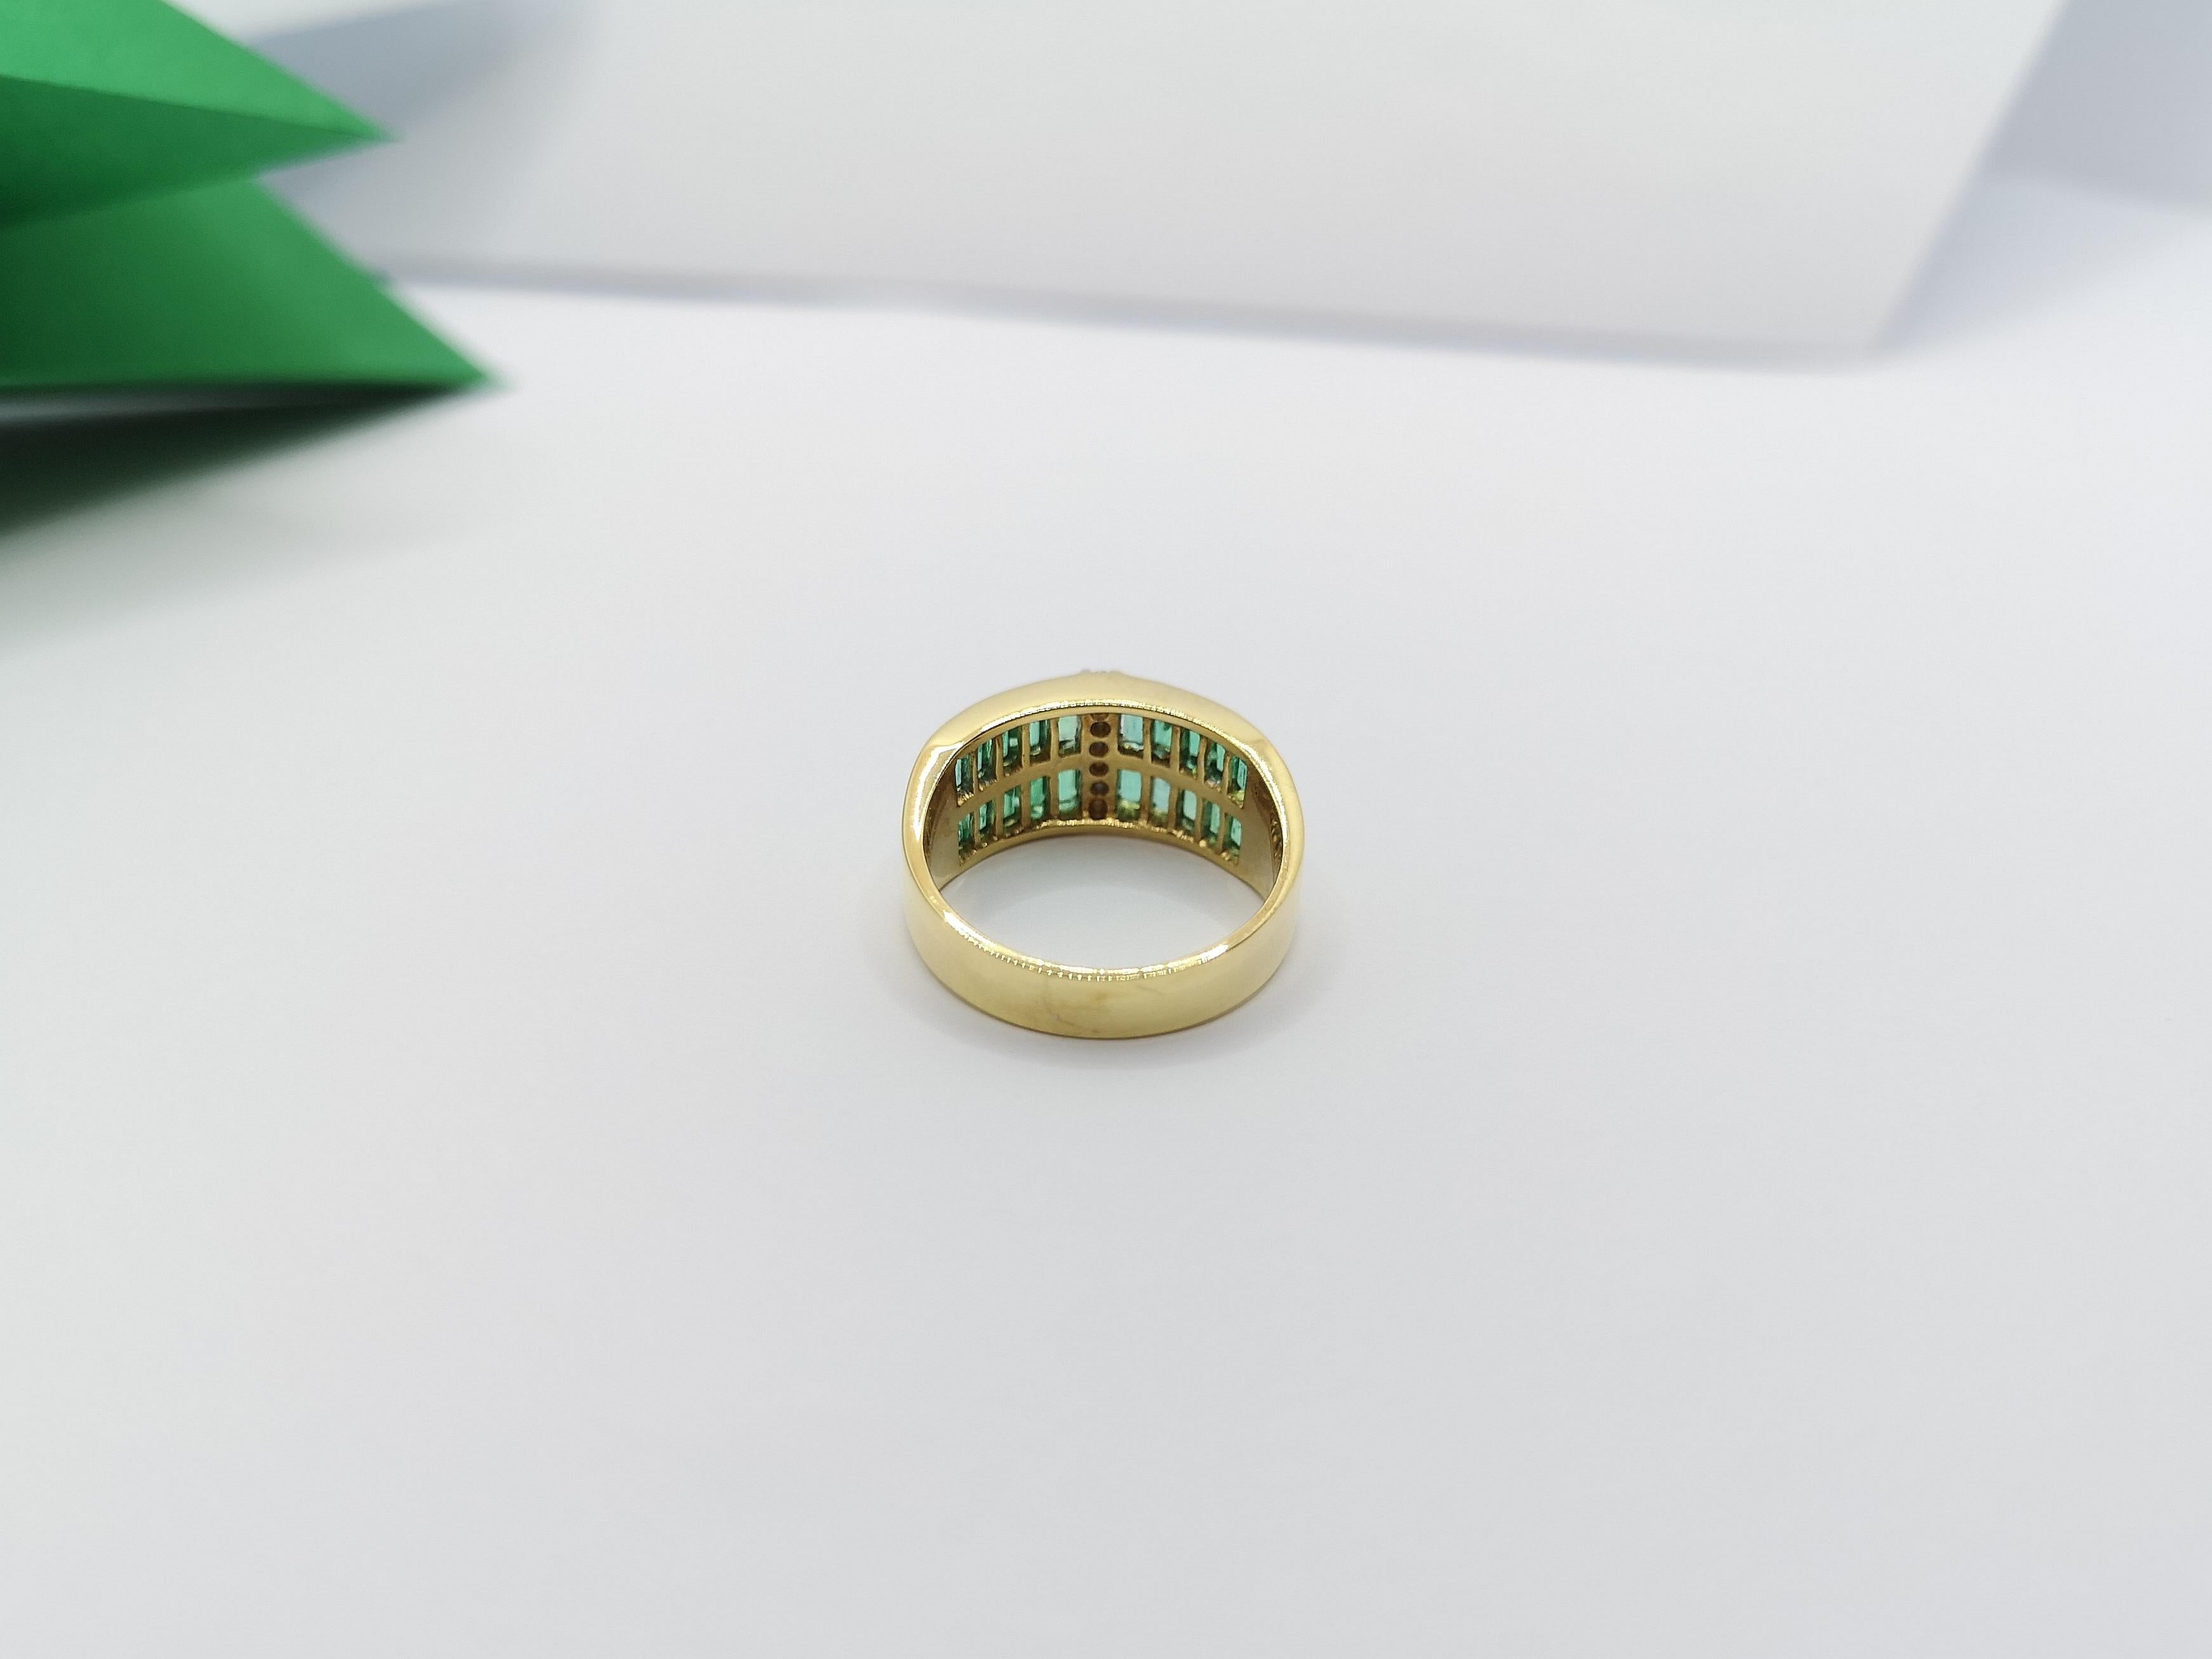 Emerald with Diamond Ring Set in 18 Karat Gold Settings For Sale 1